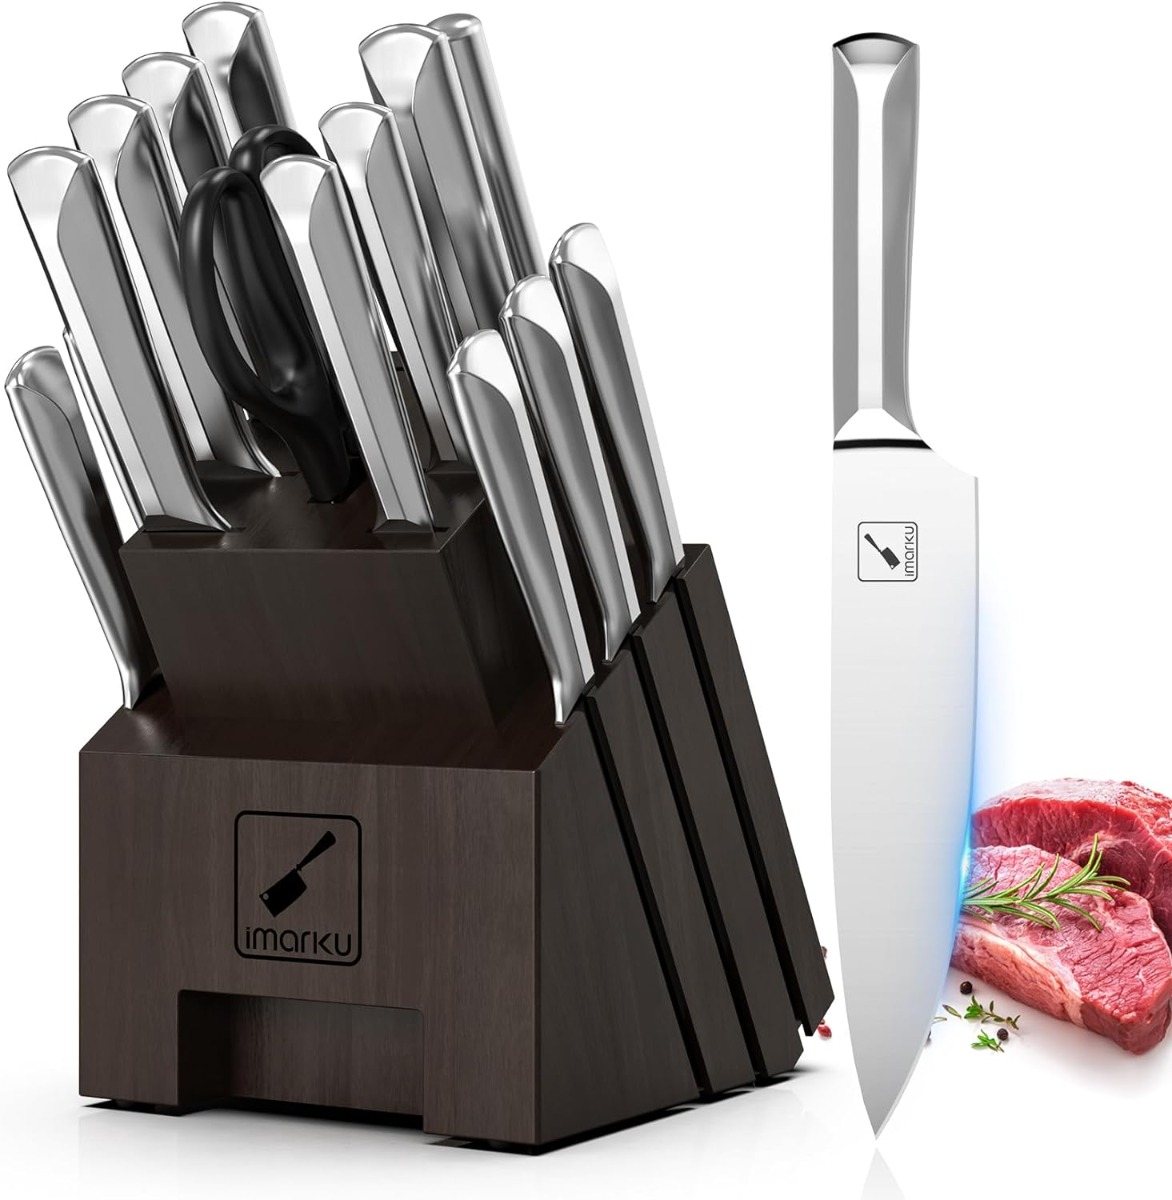 imarku 16-Piece Premium Knife Sets for Kitchen with Block